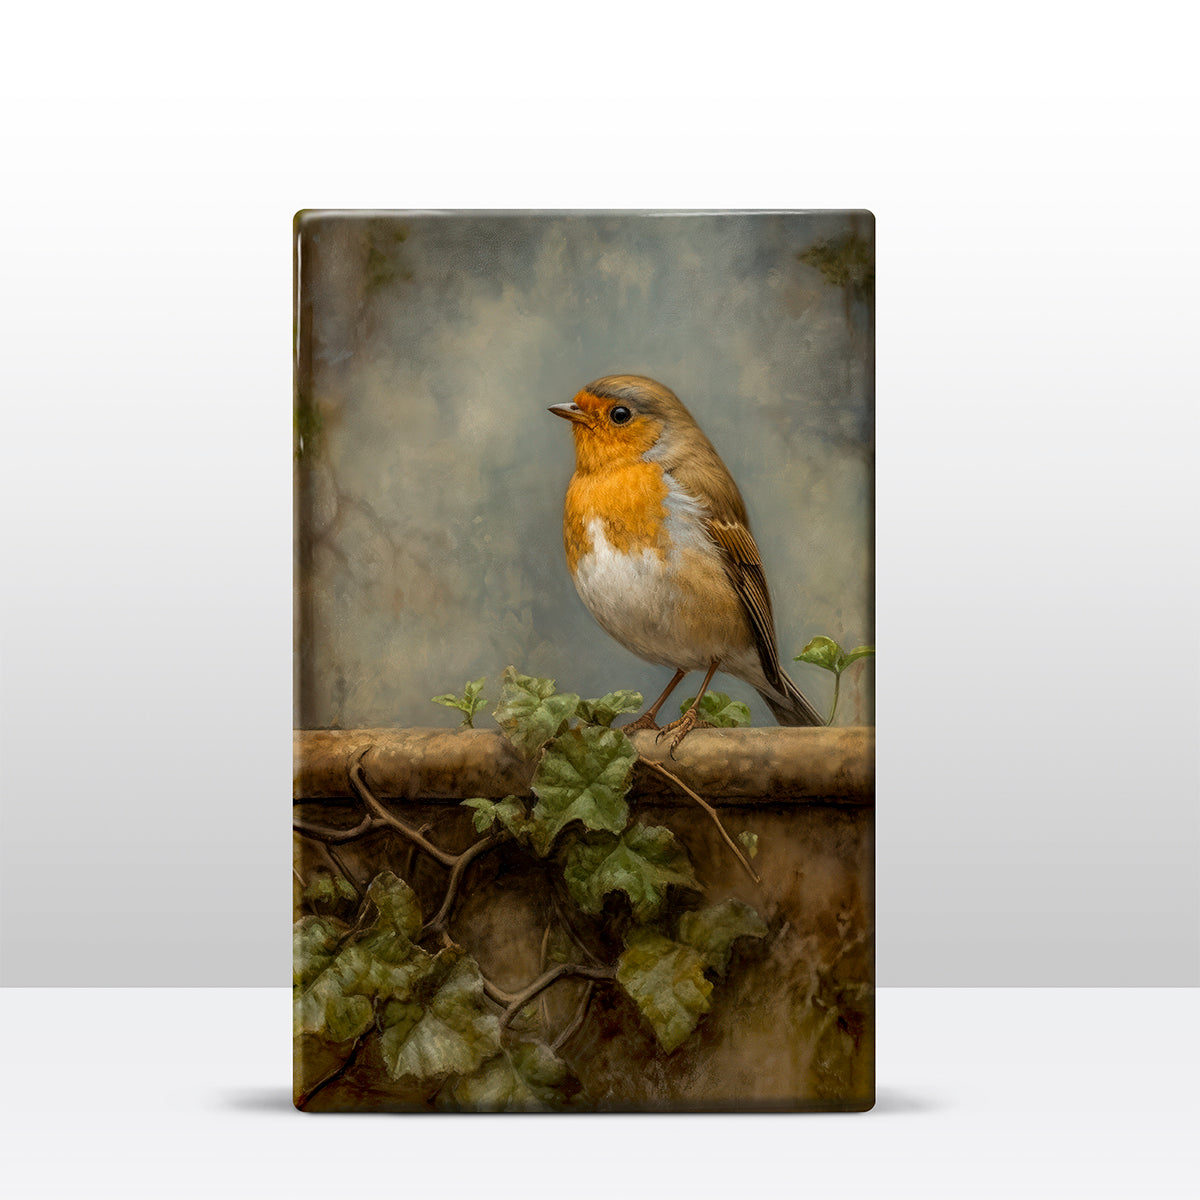 Laque print - Robin on wall - Hand lacquered - 19.5 x 30 cm - LP375